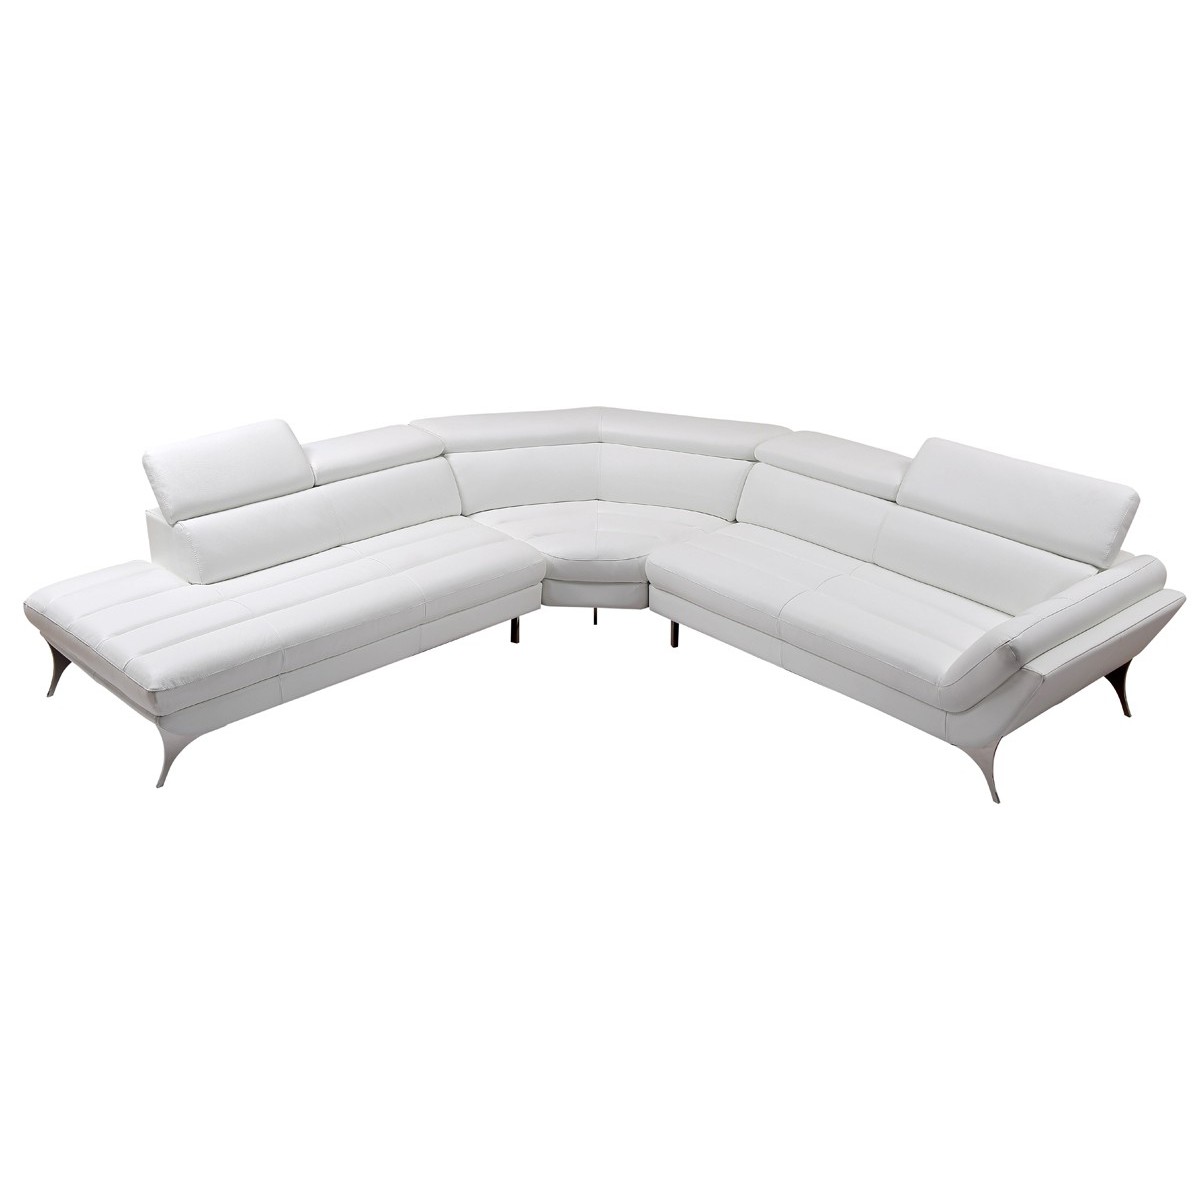 Contemporary Luxury Furniture Living, Bonded Leather Sectional With Chaise